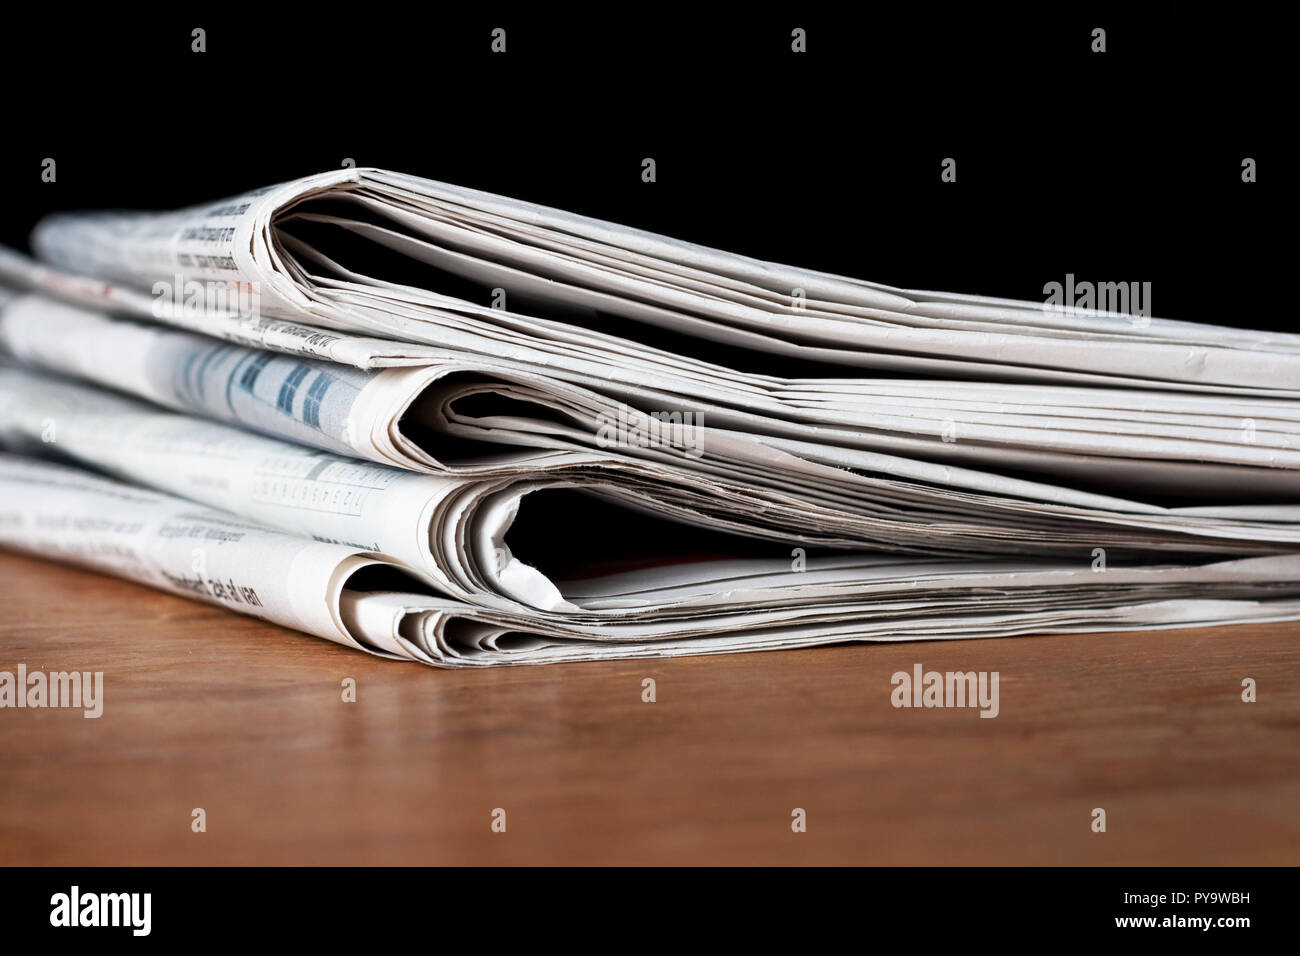 Heap of newspapers on a wooden table Stock Photo